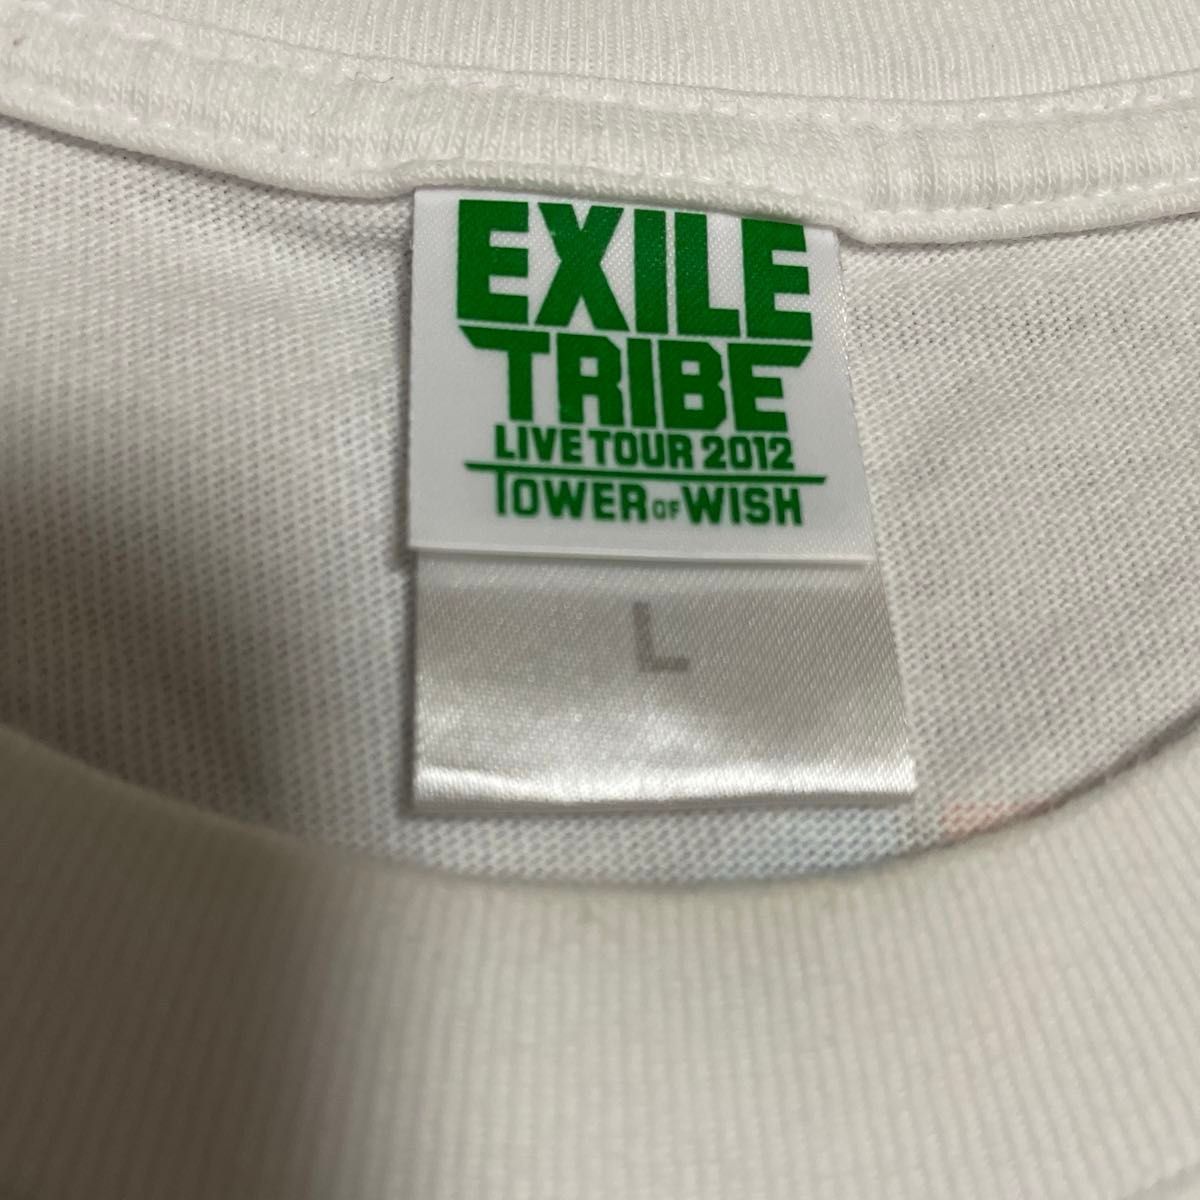 EXILE TRIBE LIVE TOUR 2012～TOWER OF WISH～ ナゴヤドーム限定 会場限定ロゴTシャツ